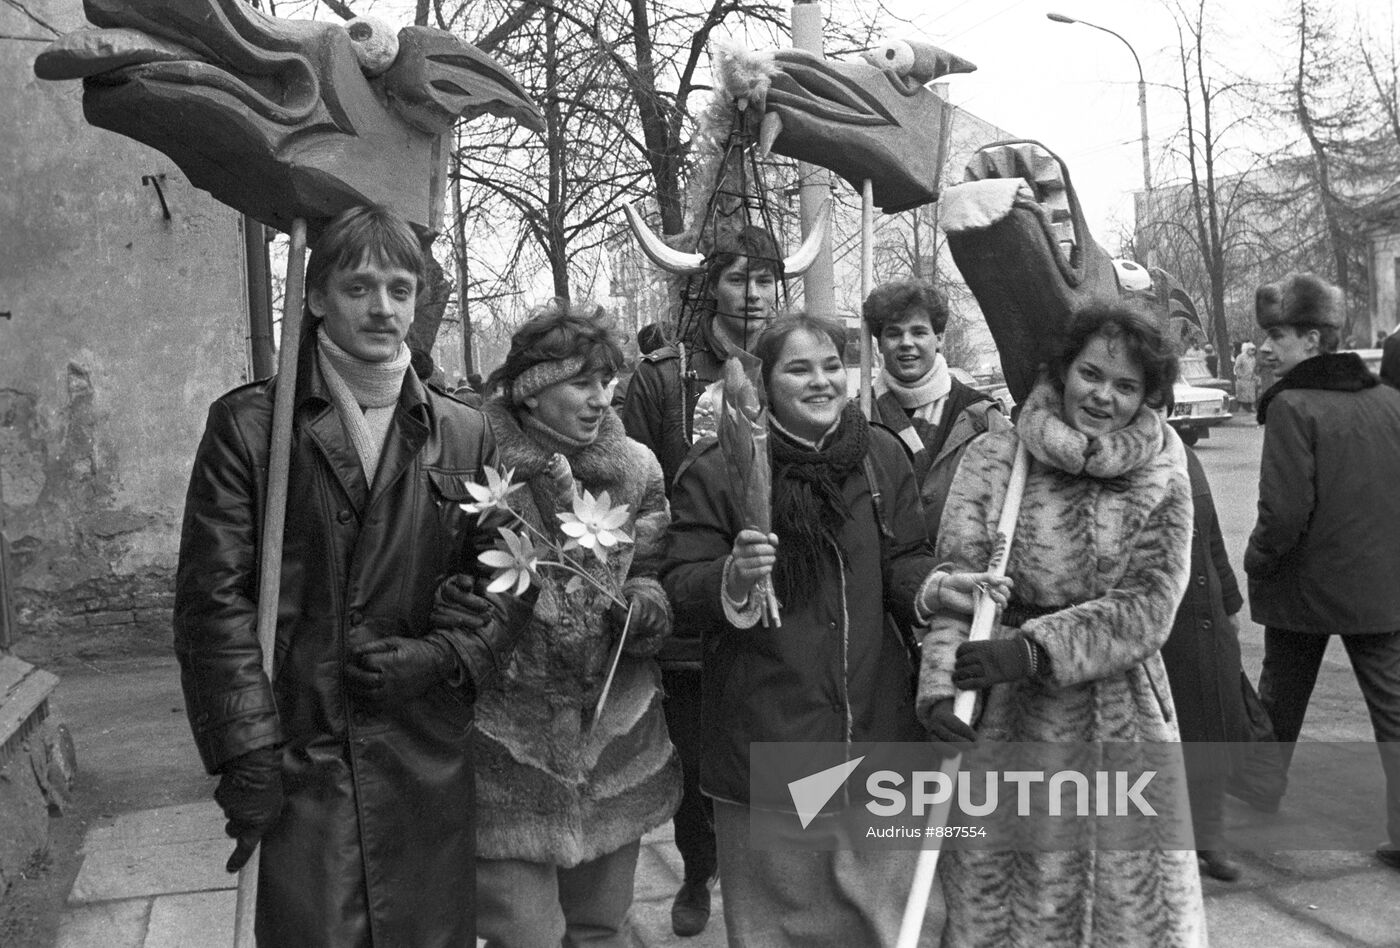 Young people going to attend a traditional spring-time fair